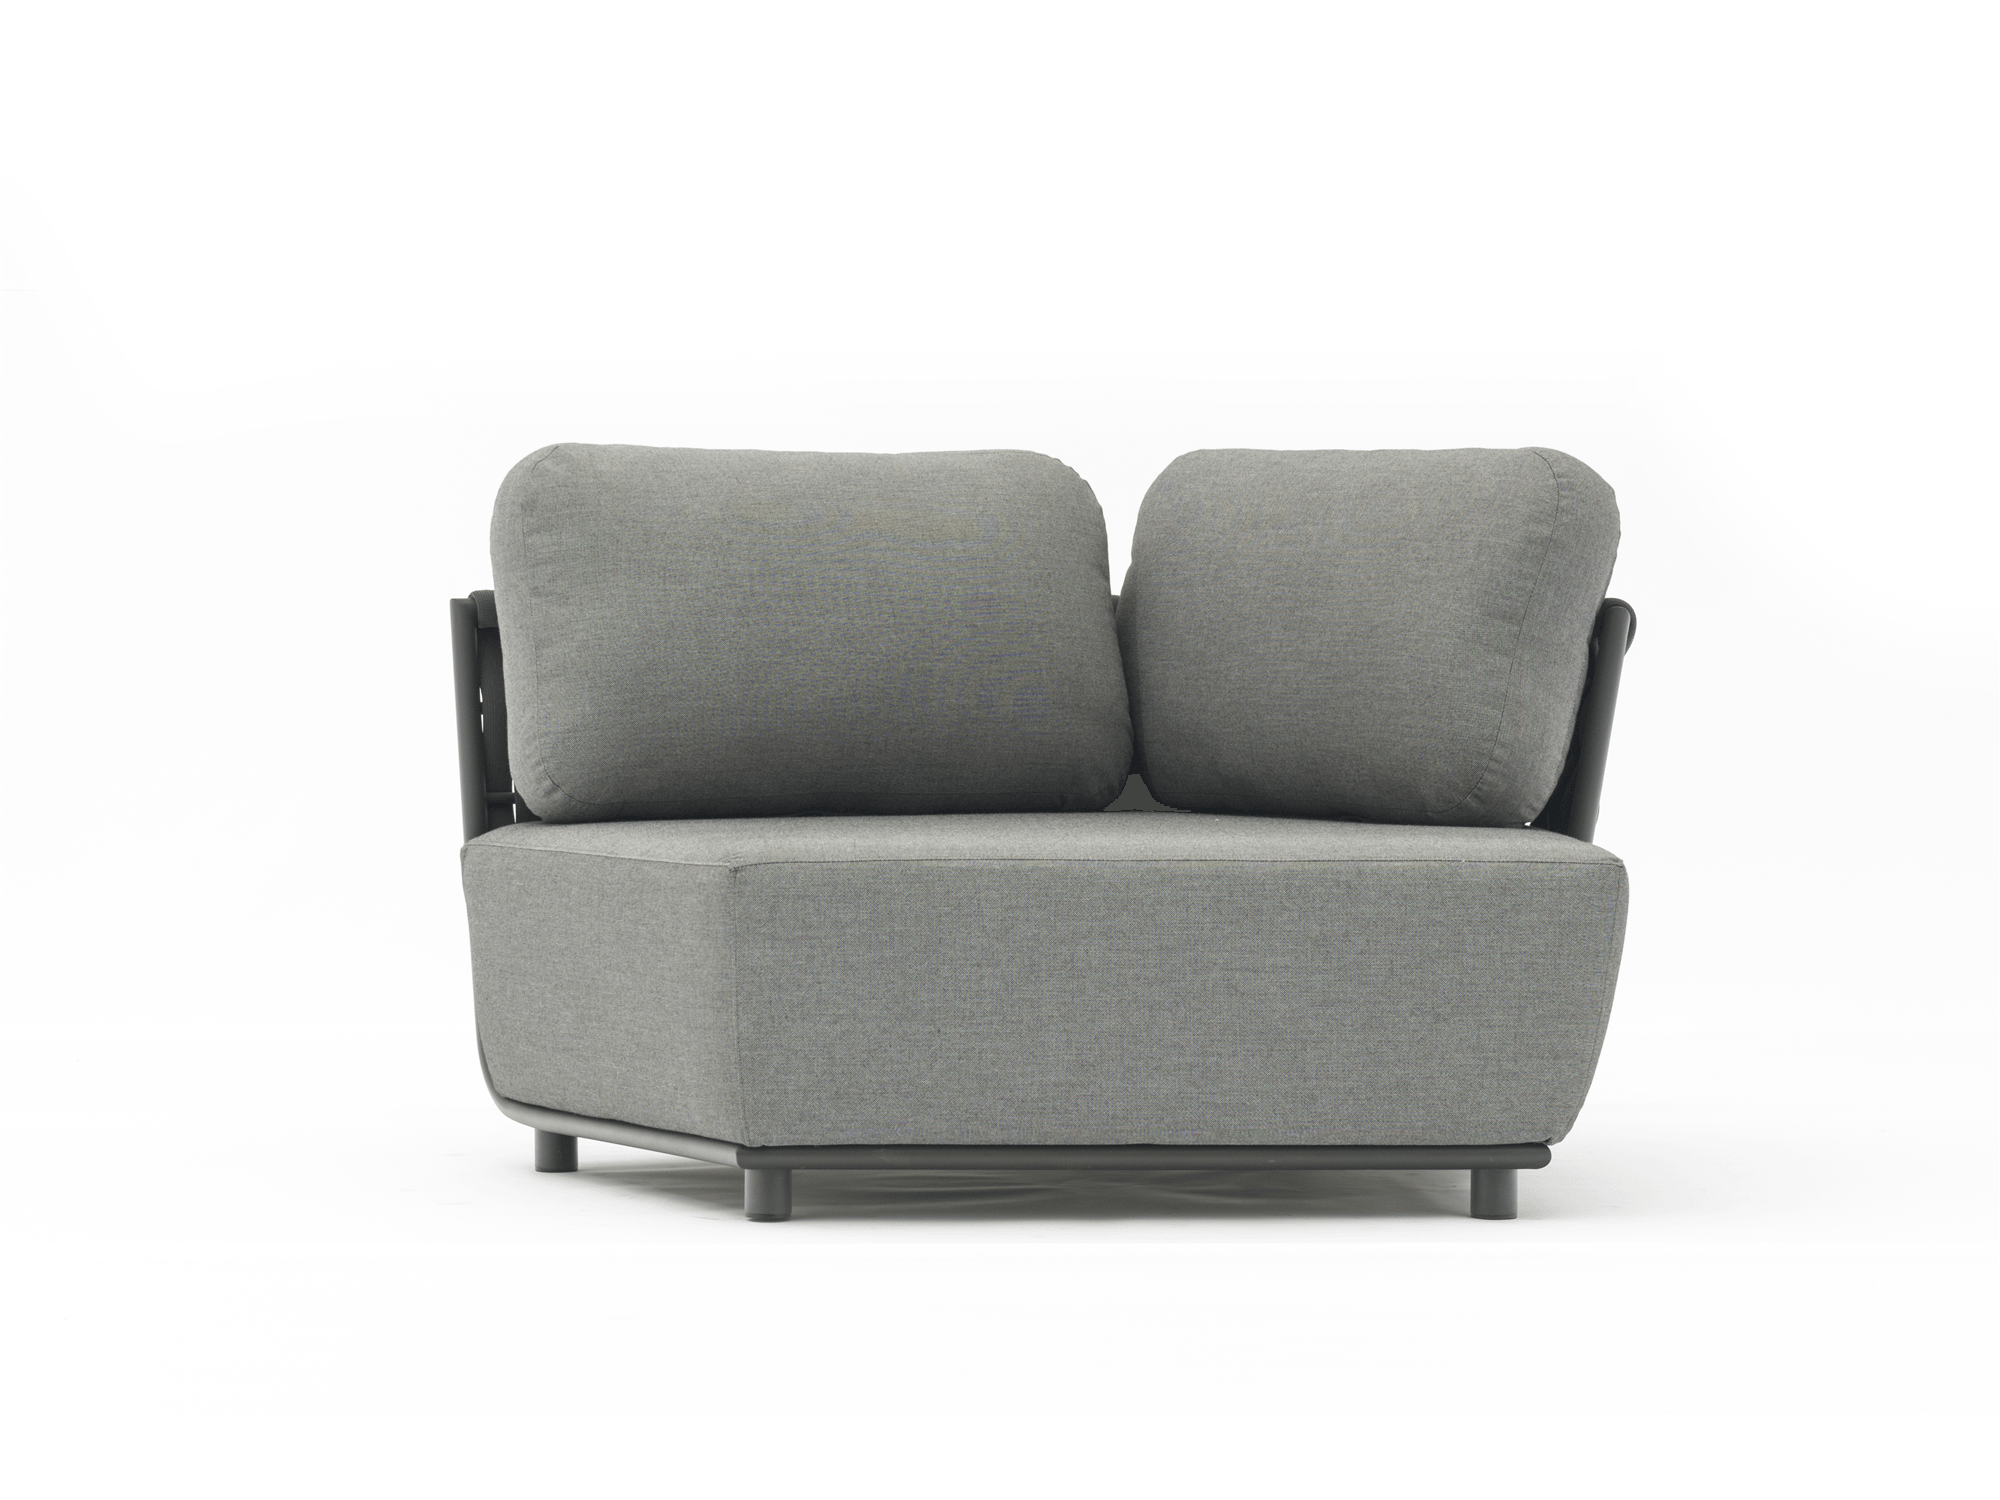 Ayla Curved Chair in Dark Grey - Euro Living Furniture